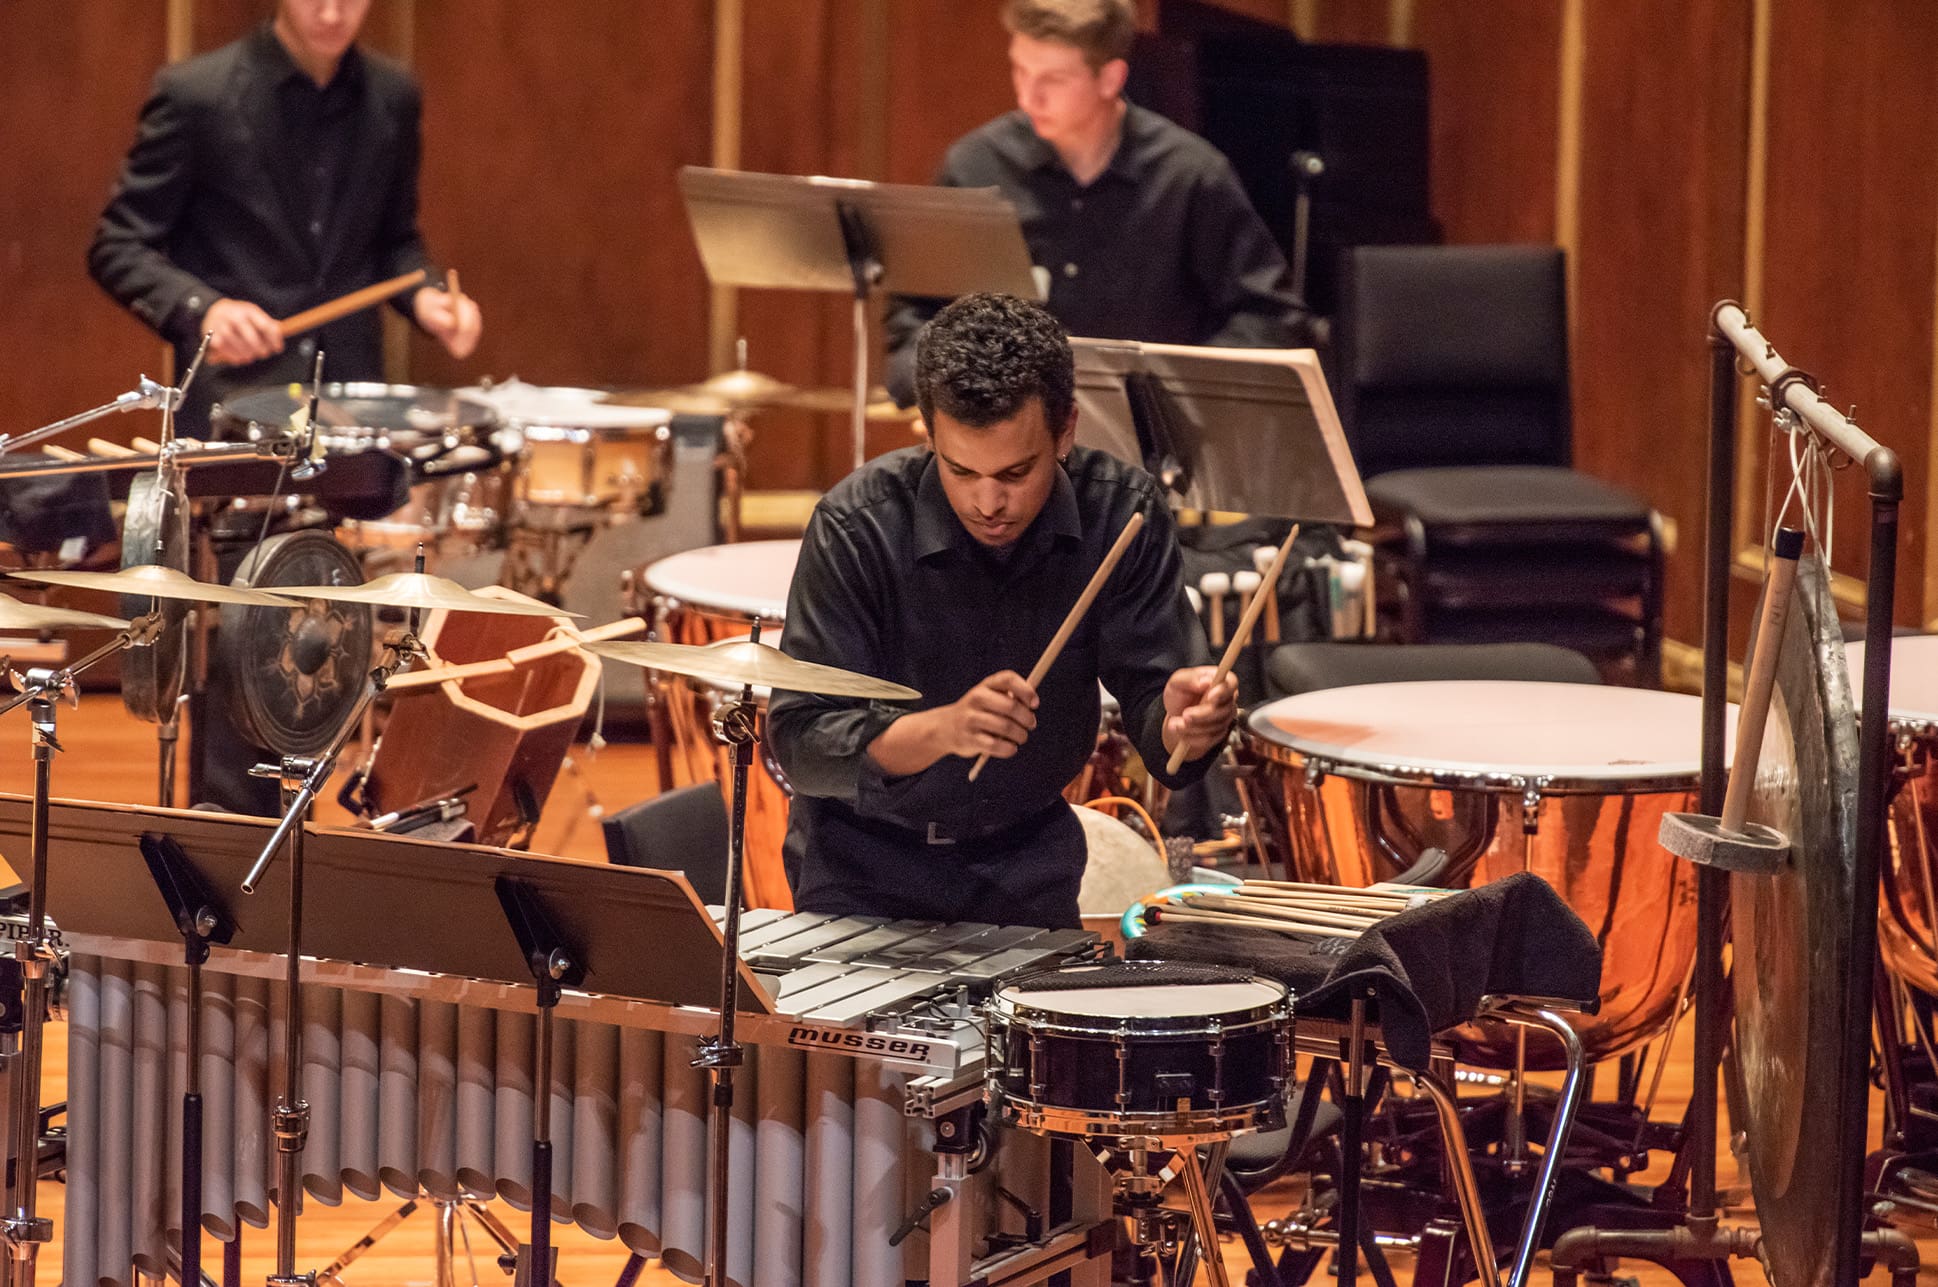 Percussionist performing with ensemble on stage